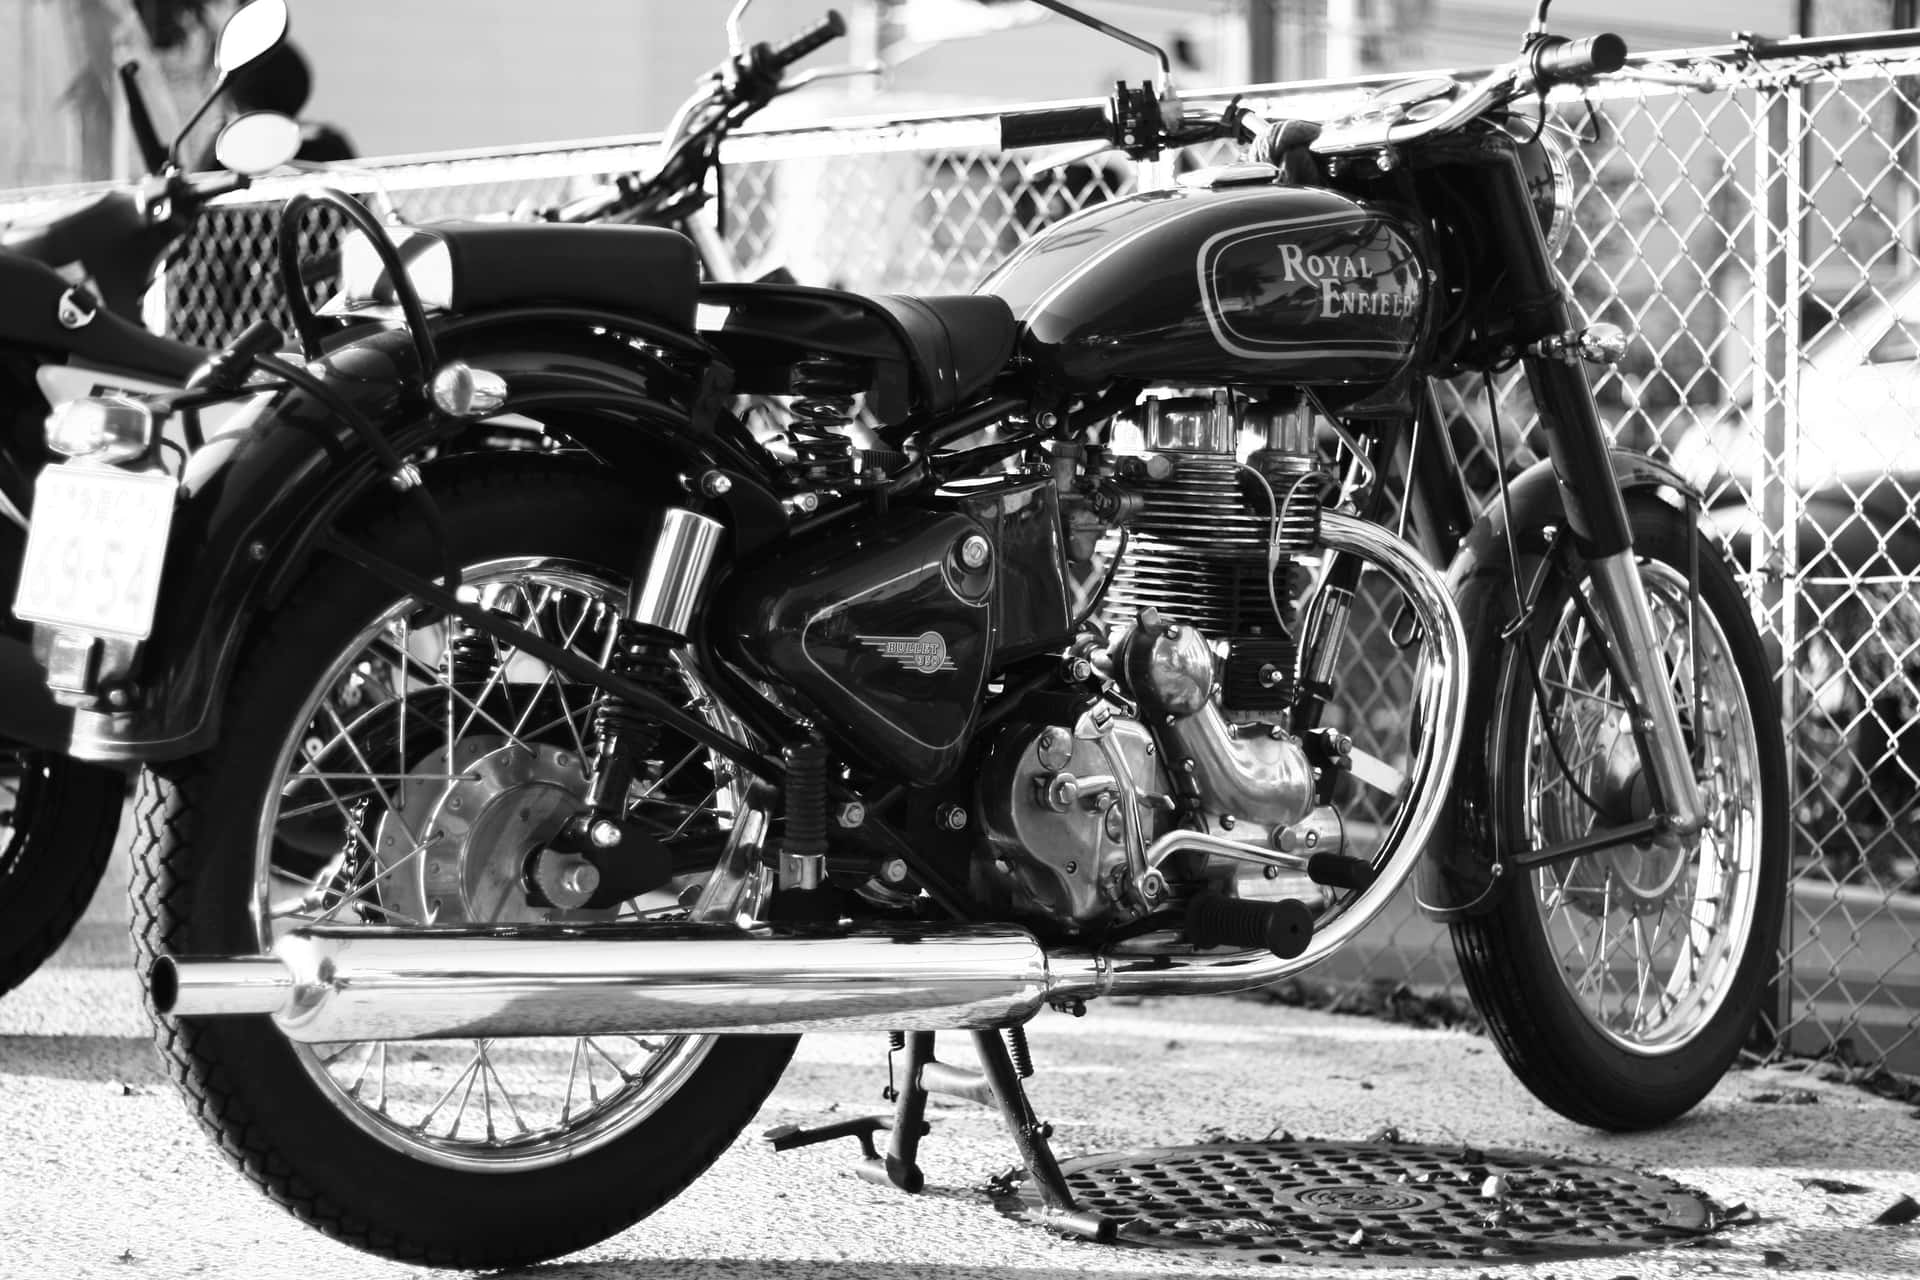 A Black And White Photo Of Two Motorcycles